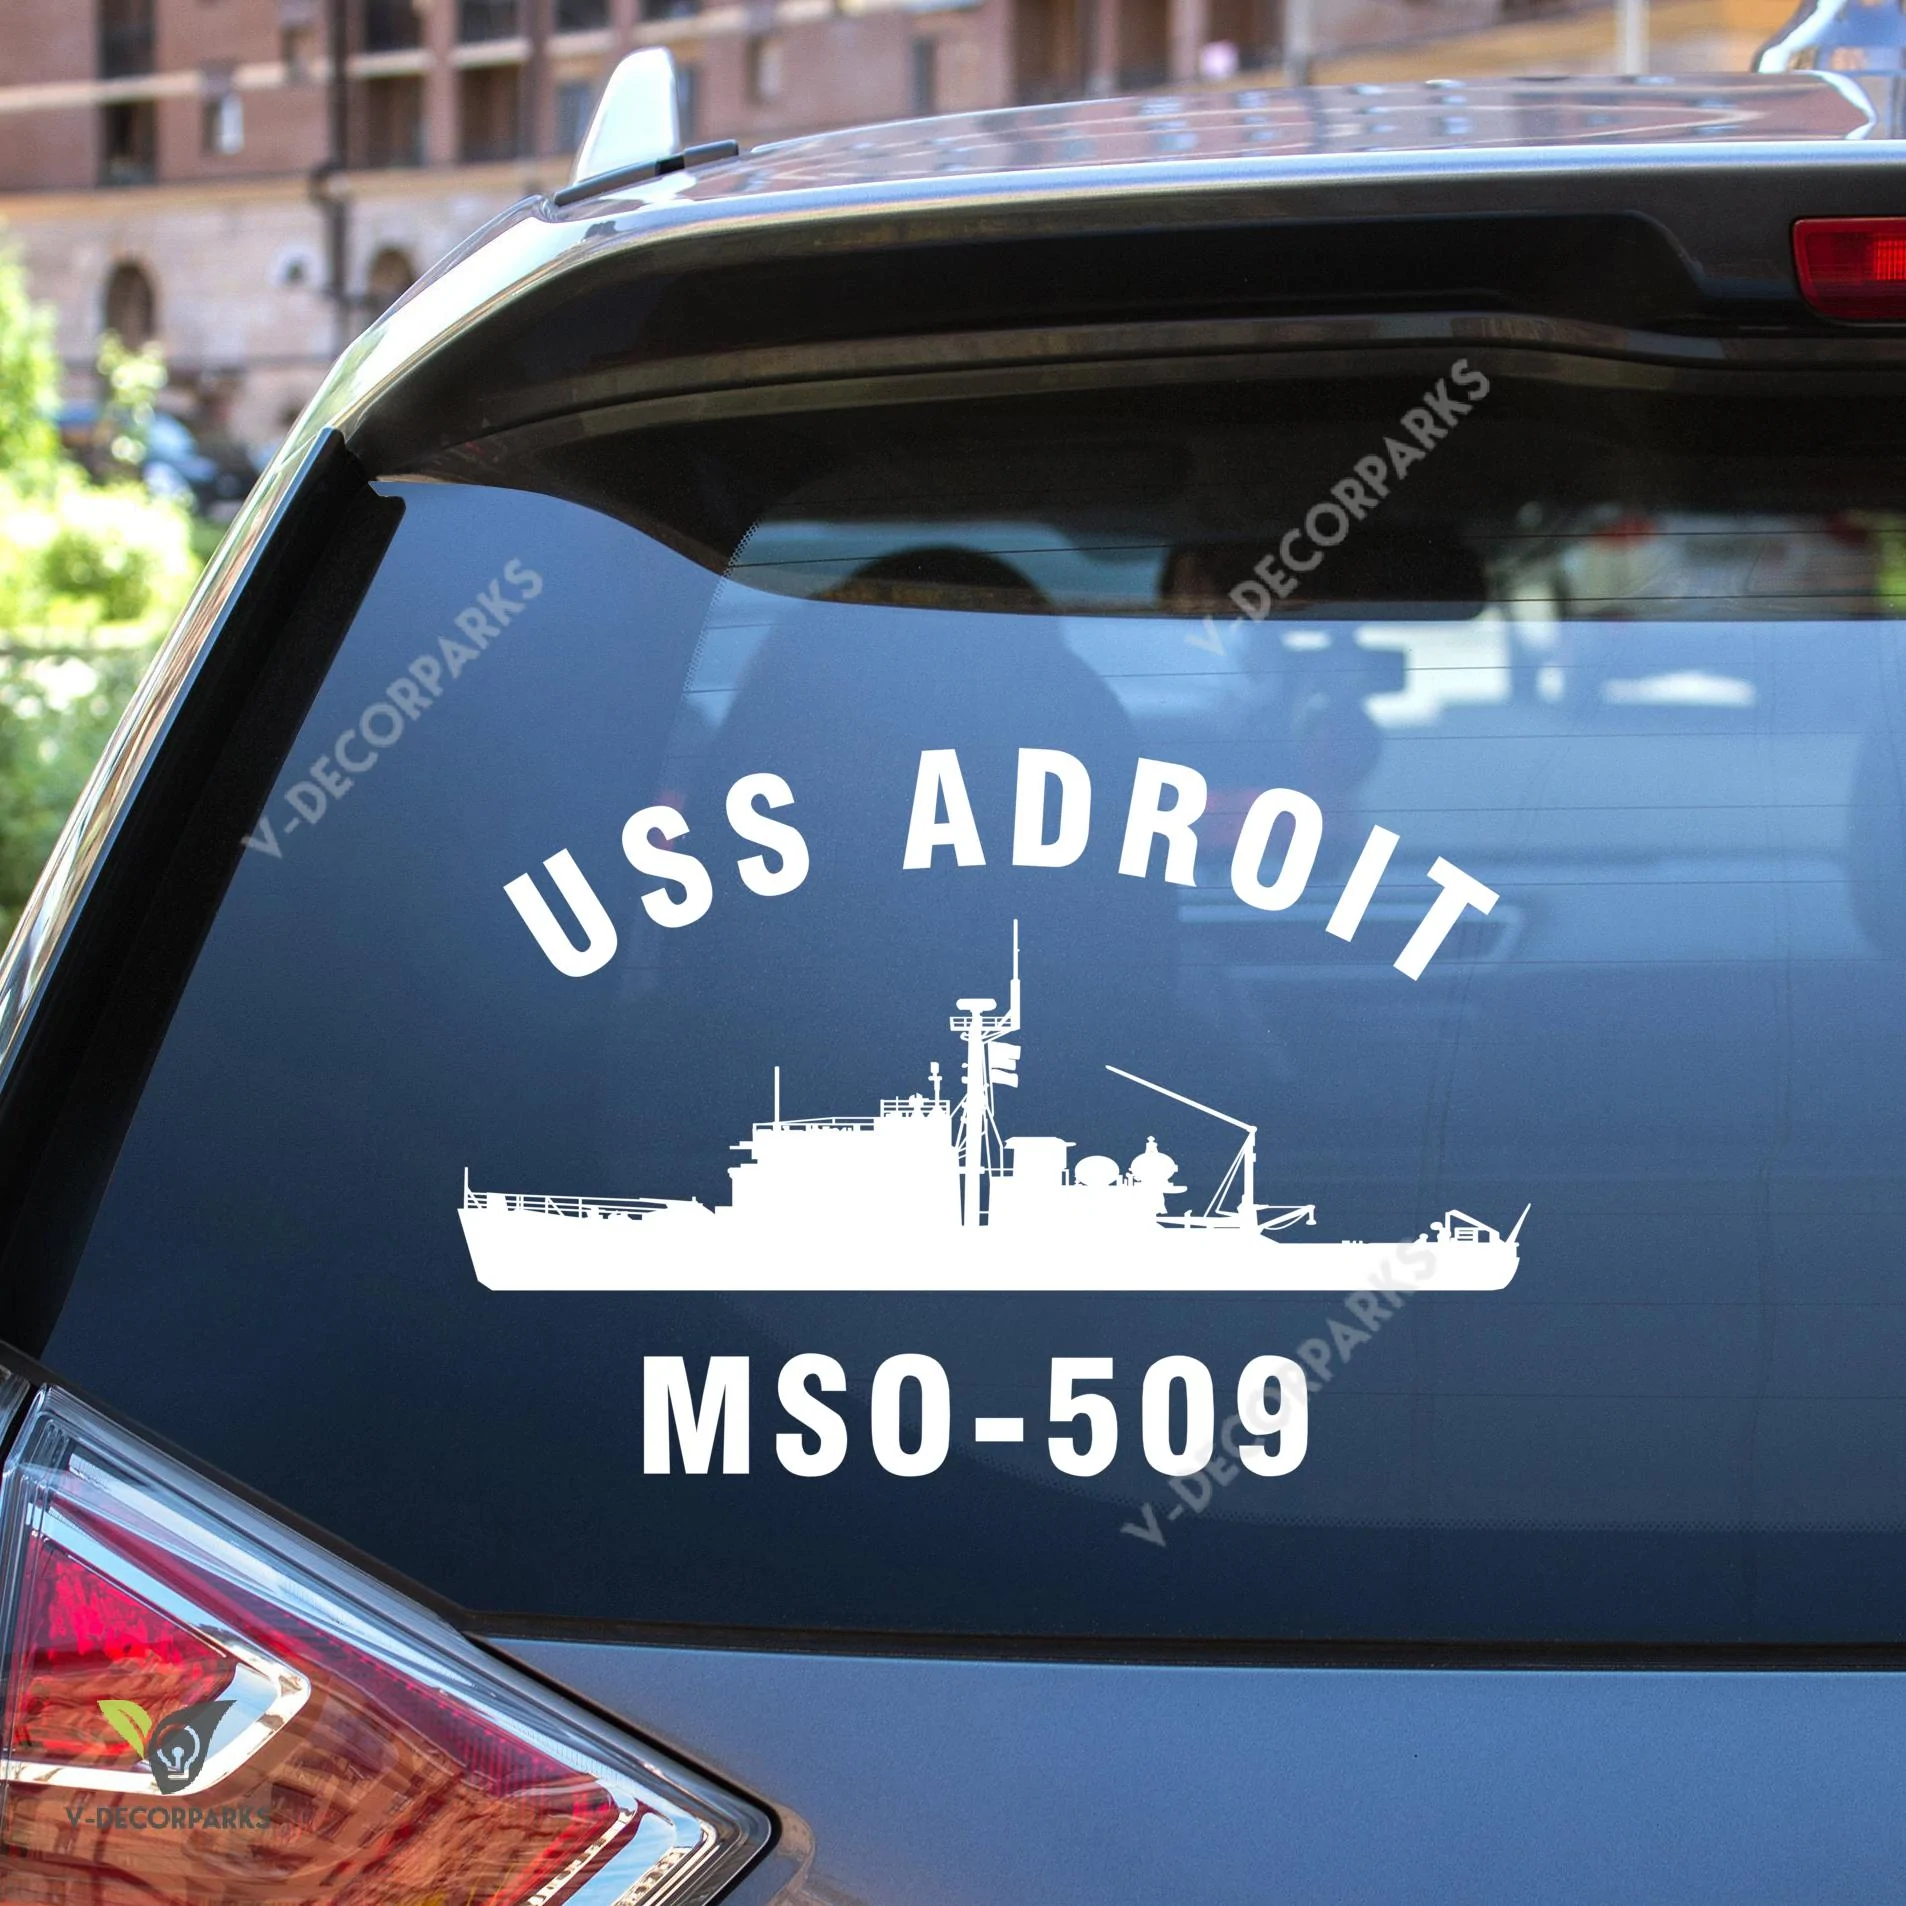 Uss Adroit Mso-509 Navy Ships Car Decal, Car Window Sticker Gift For Navy Veteran